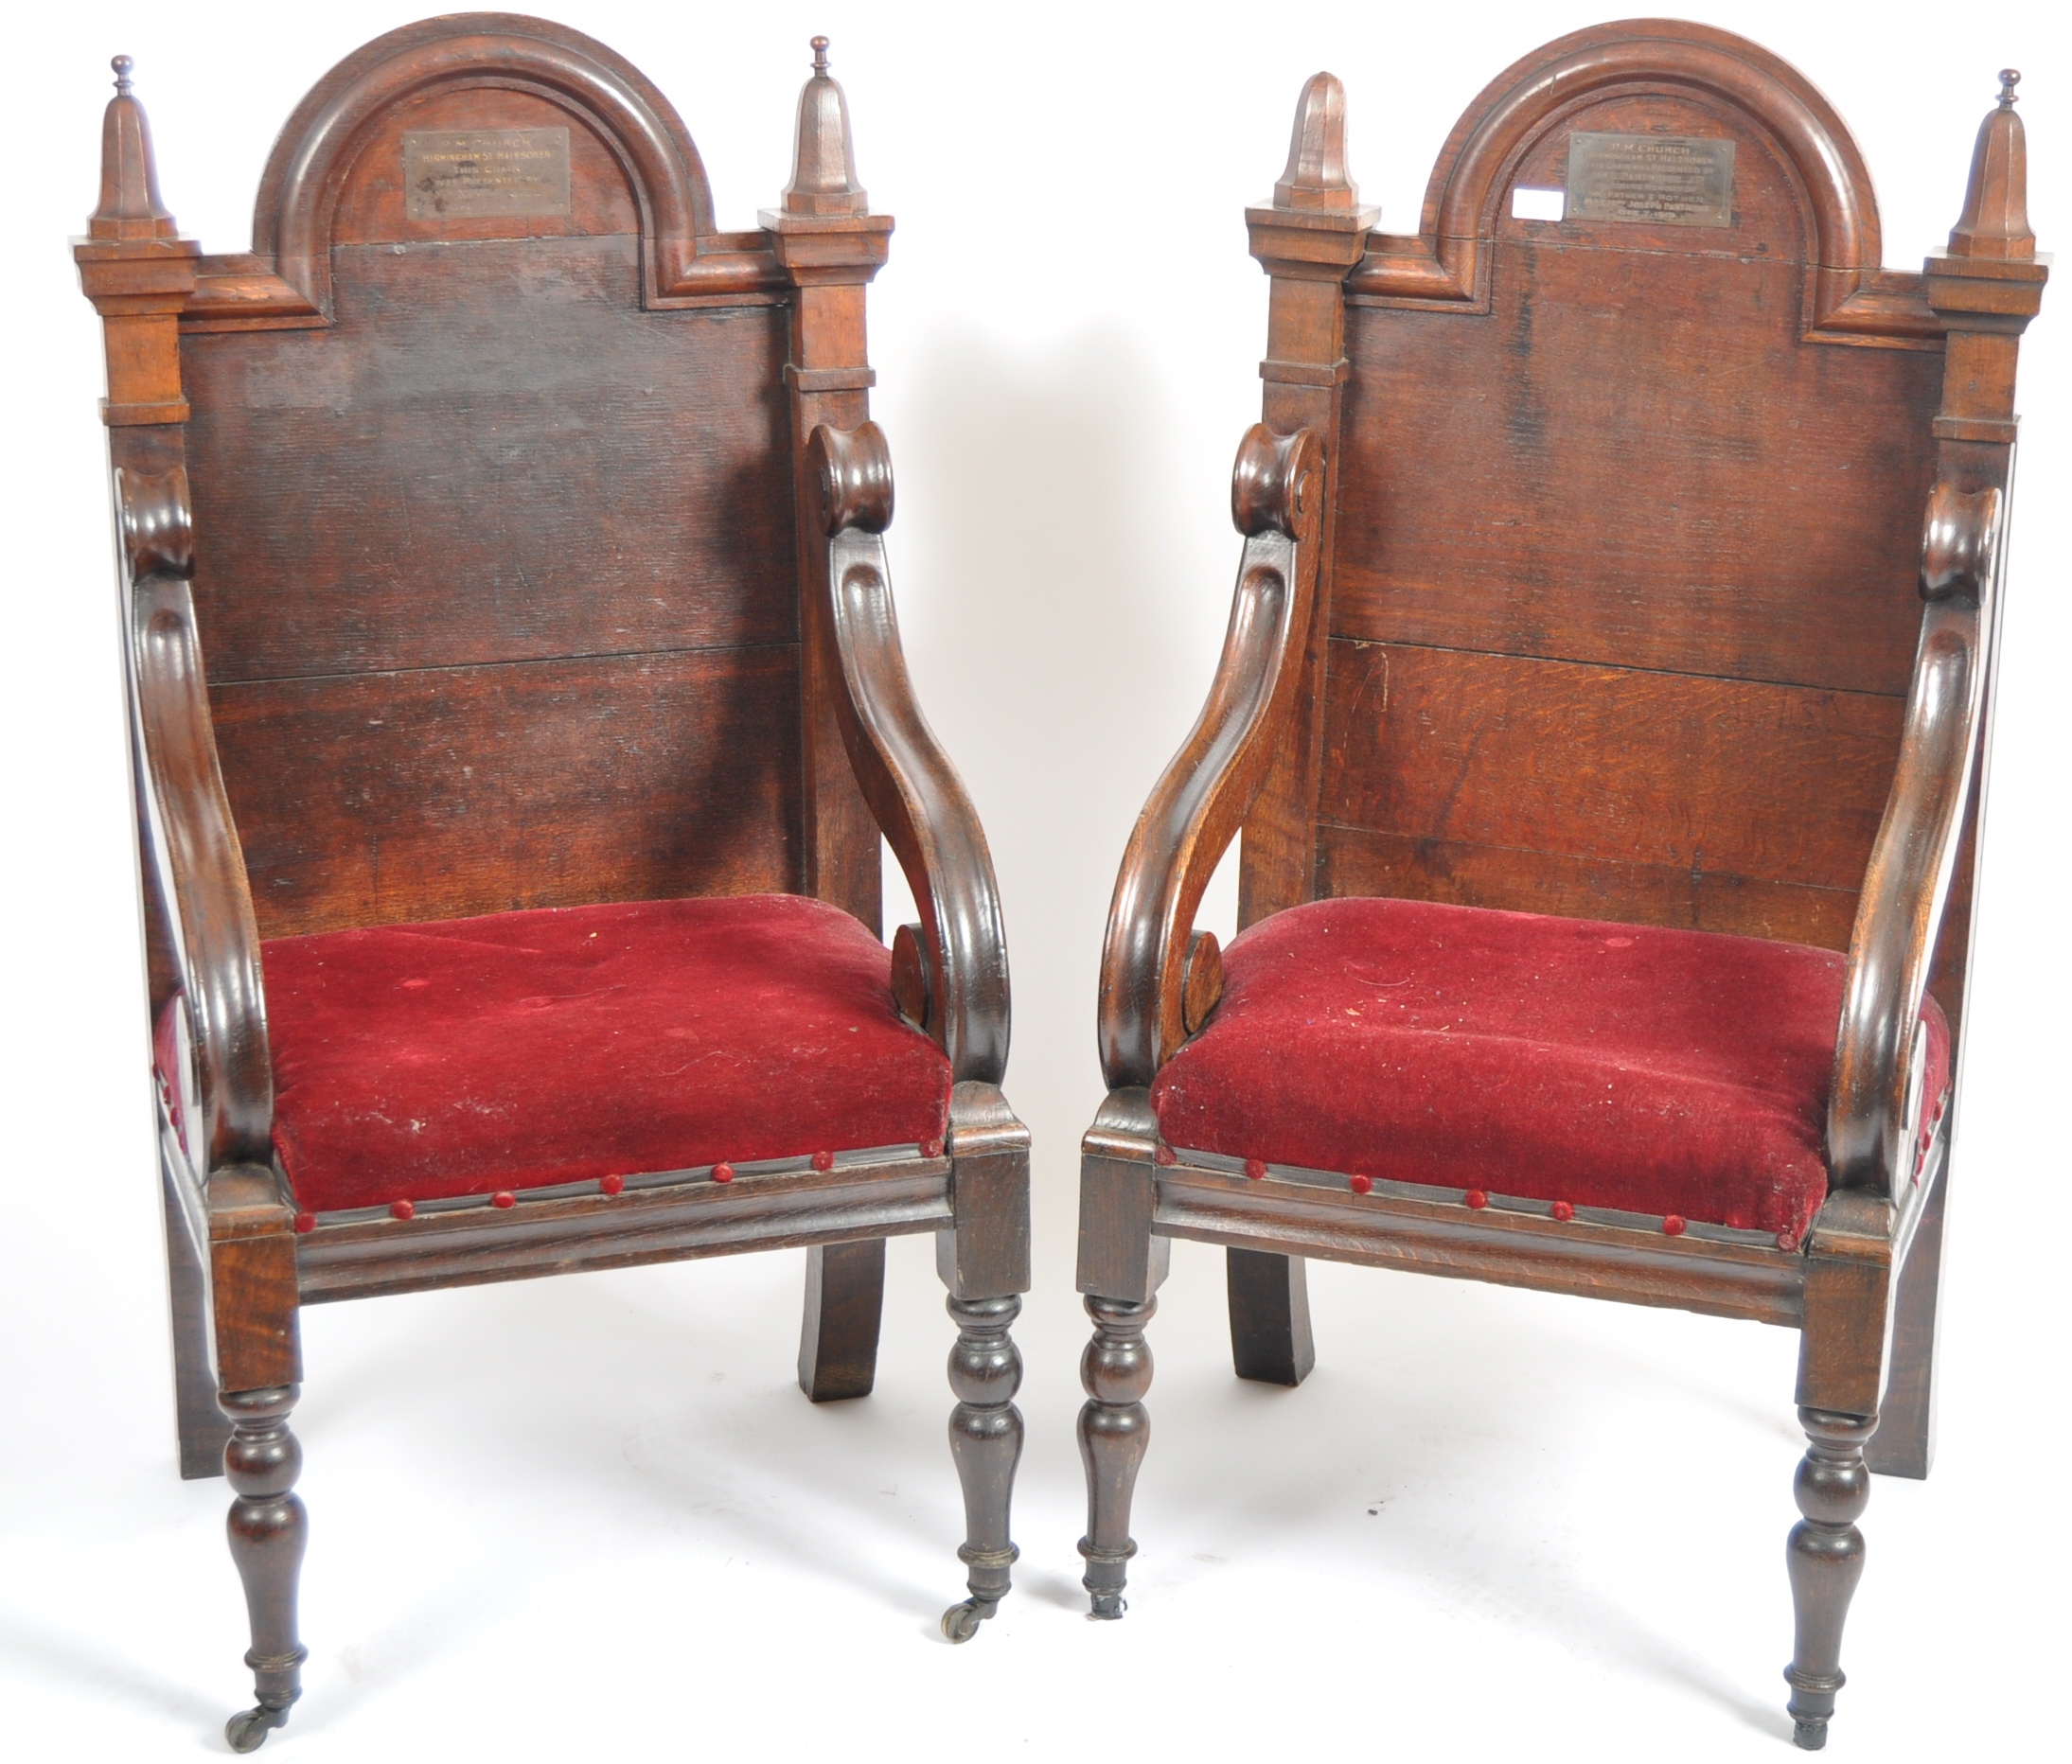 PAIR OF 19TH CENTURY GOTHIC OAK THRONE ARMCHAIRS - Image 2 of 8